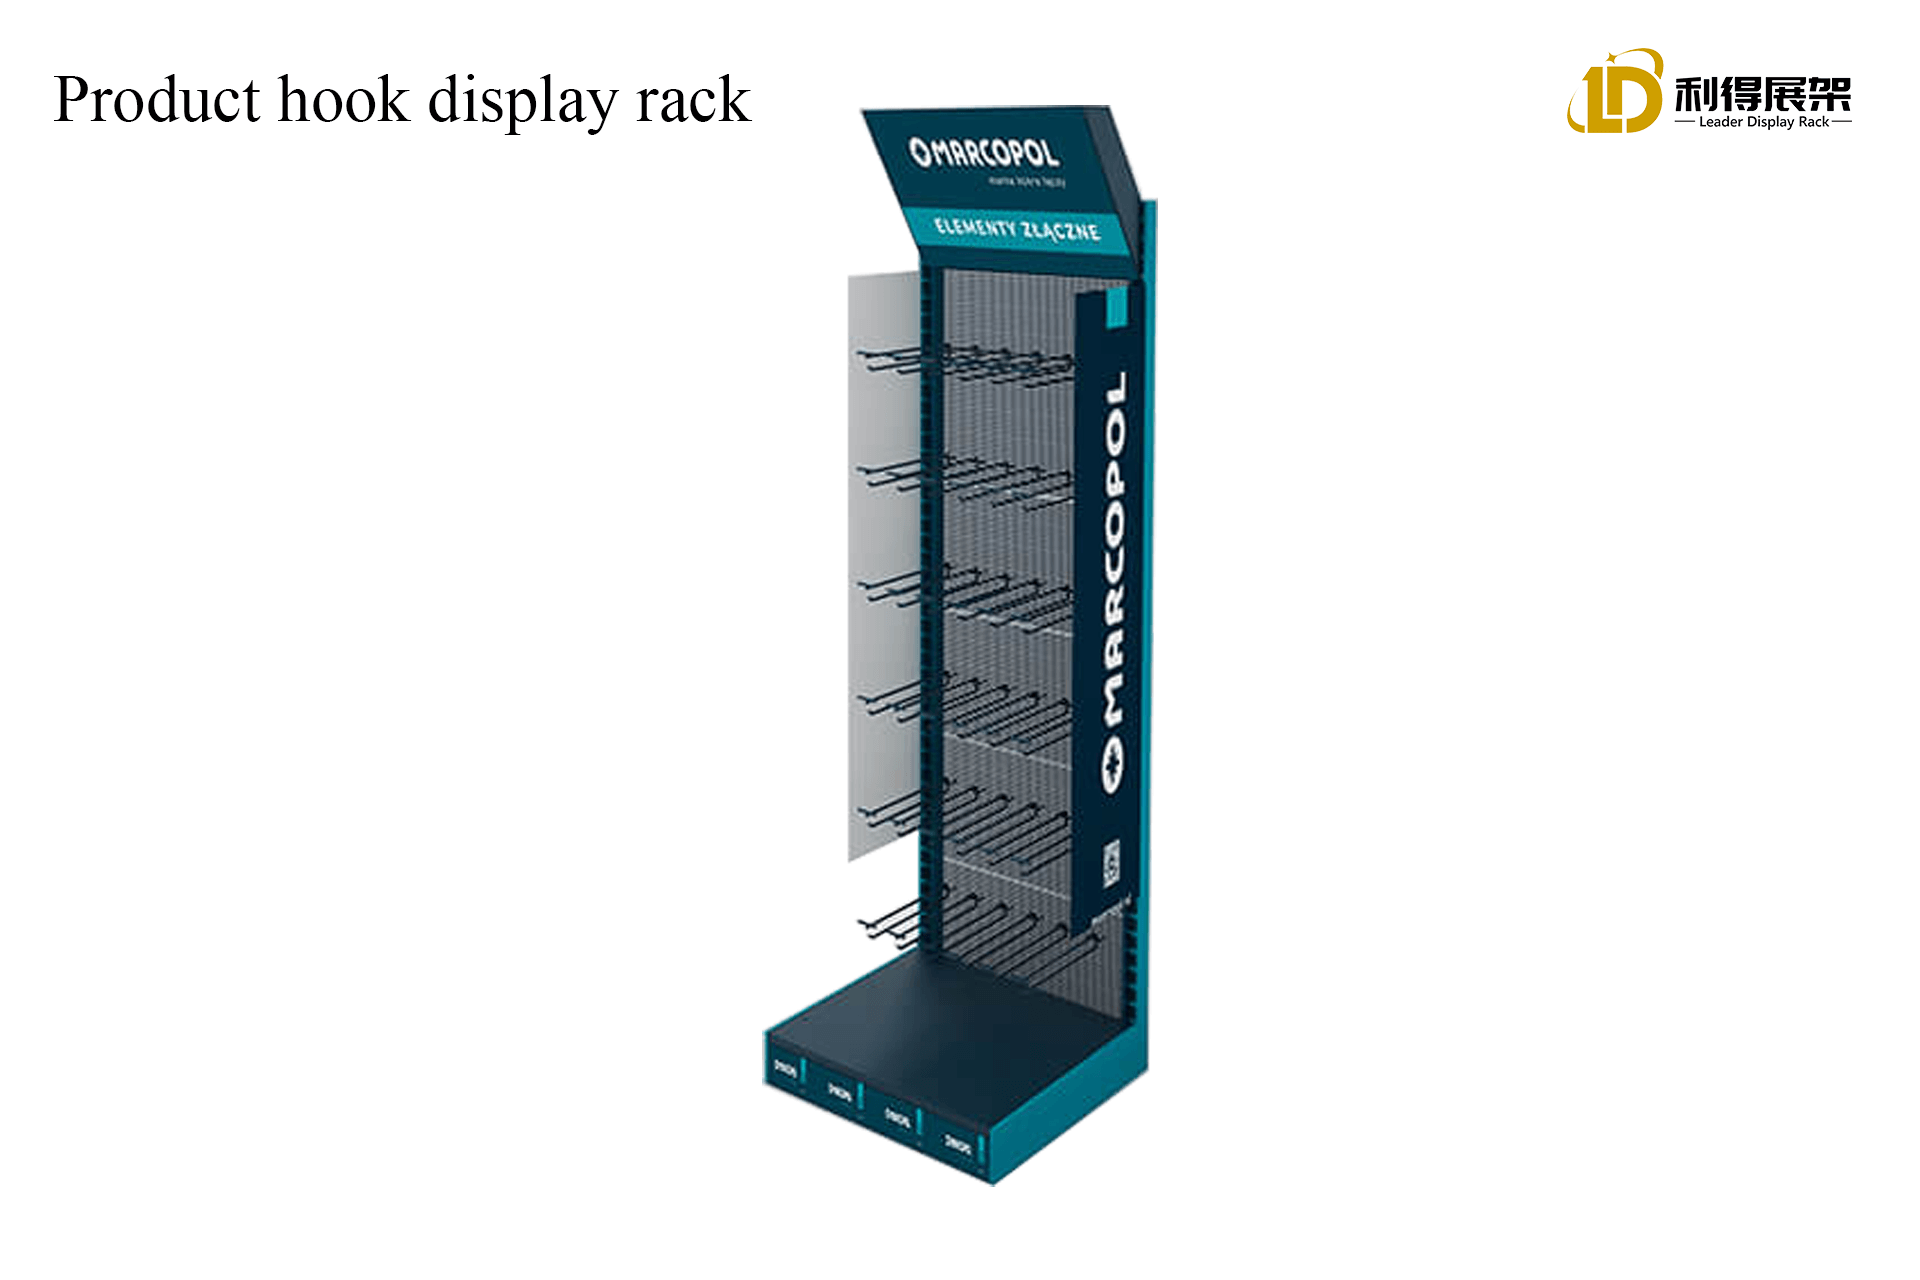 Hook Display Rack, The Key To Improve The Product Display Effect